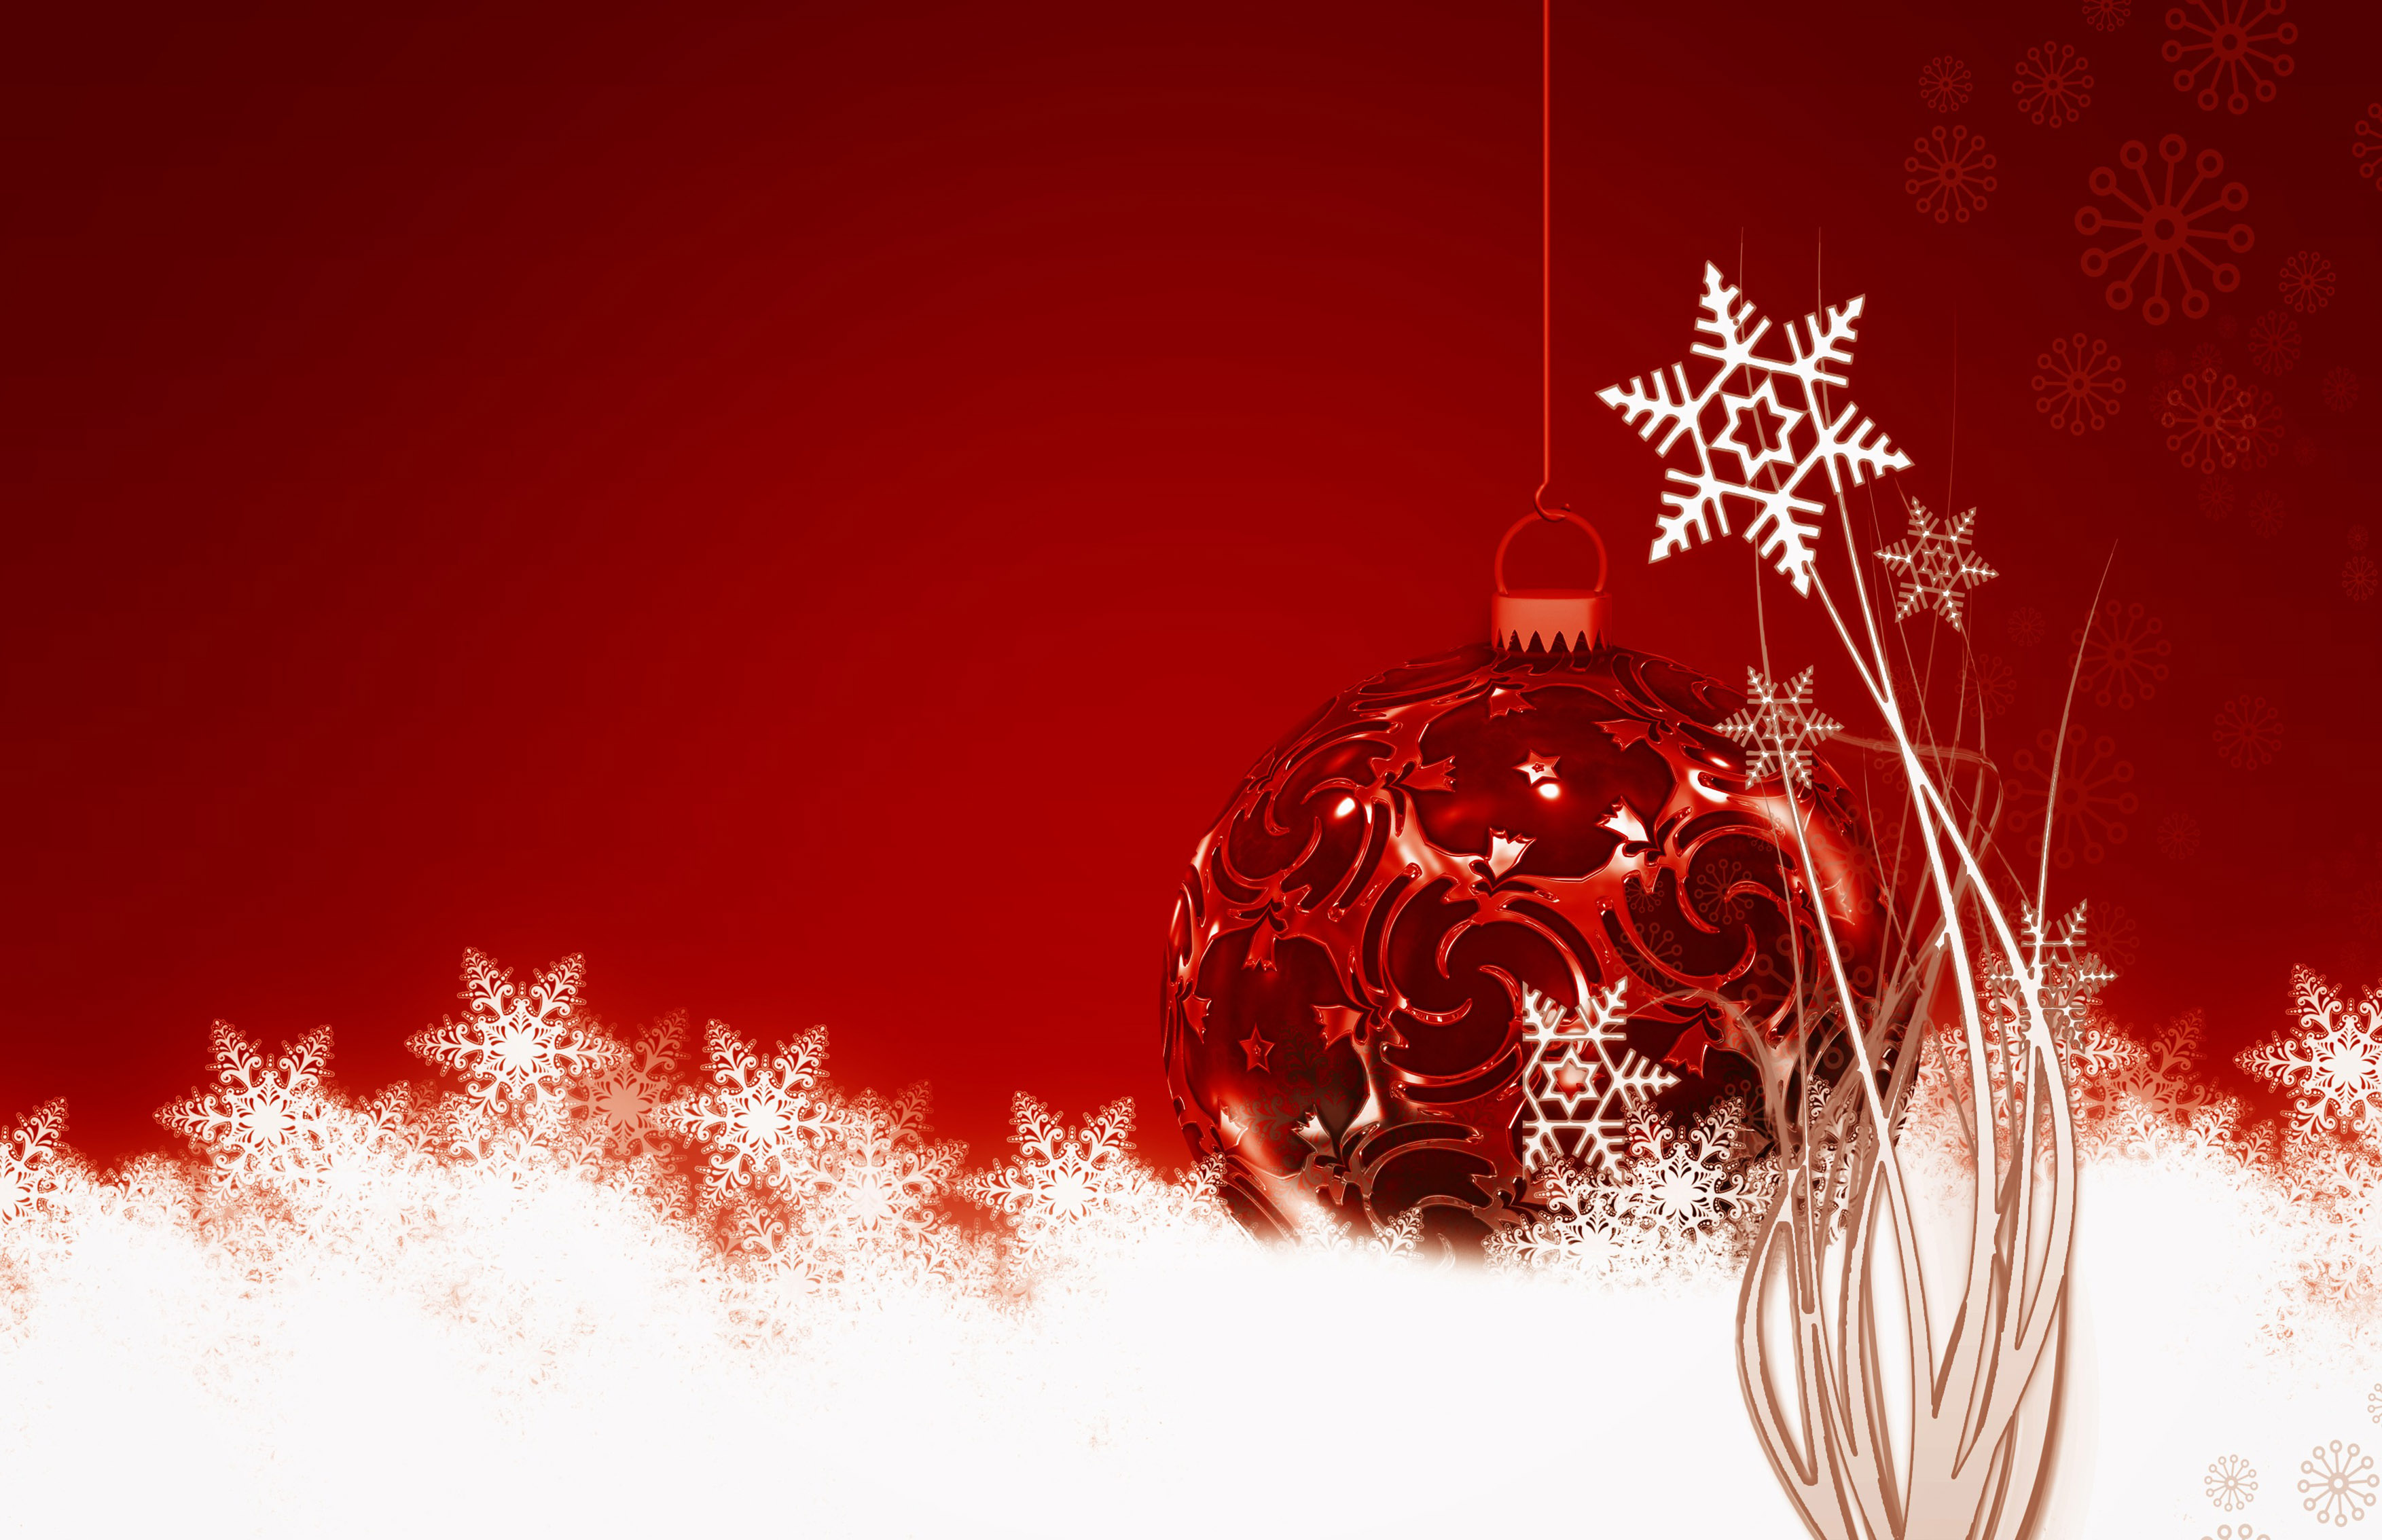 50 Great Free Pictures for Christmas Wallpaper, Background Images and Cards